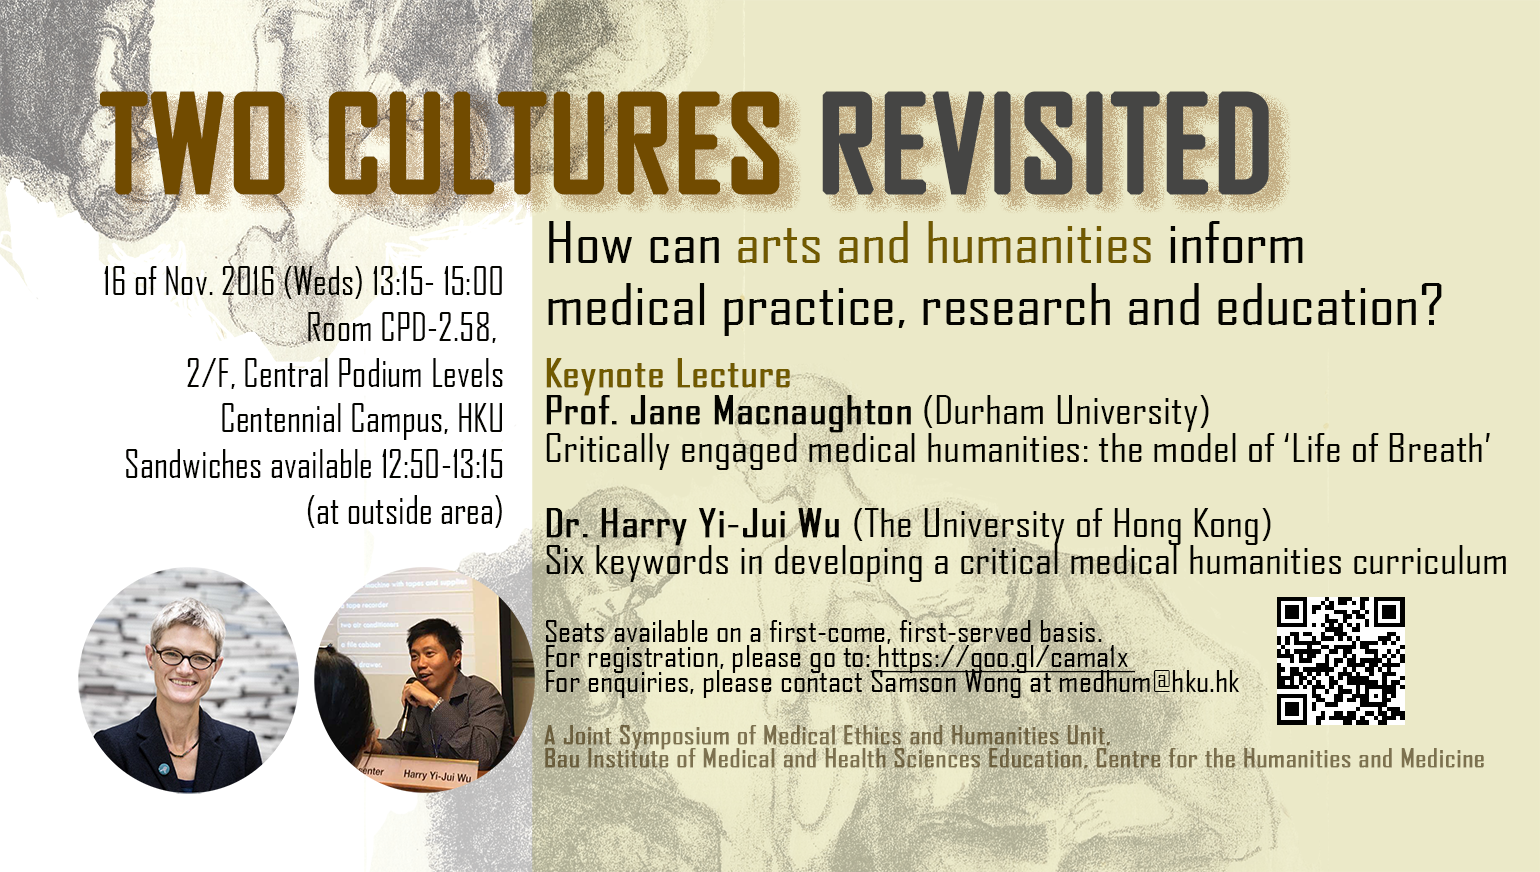 Lunchtime Symposium: Two Cultures Revisited - How can Arts and Humanities Inform Medical Practice, Research and Education?